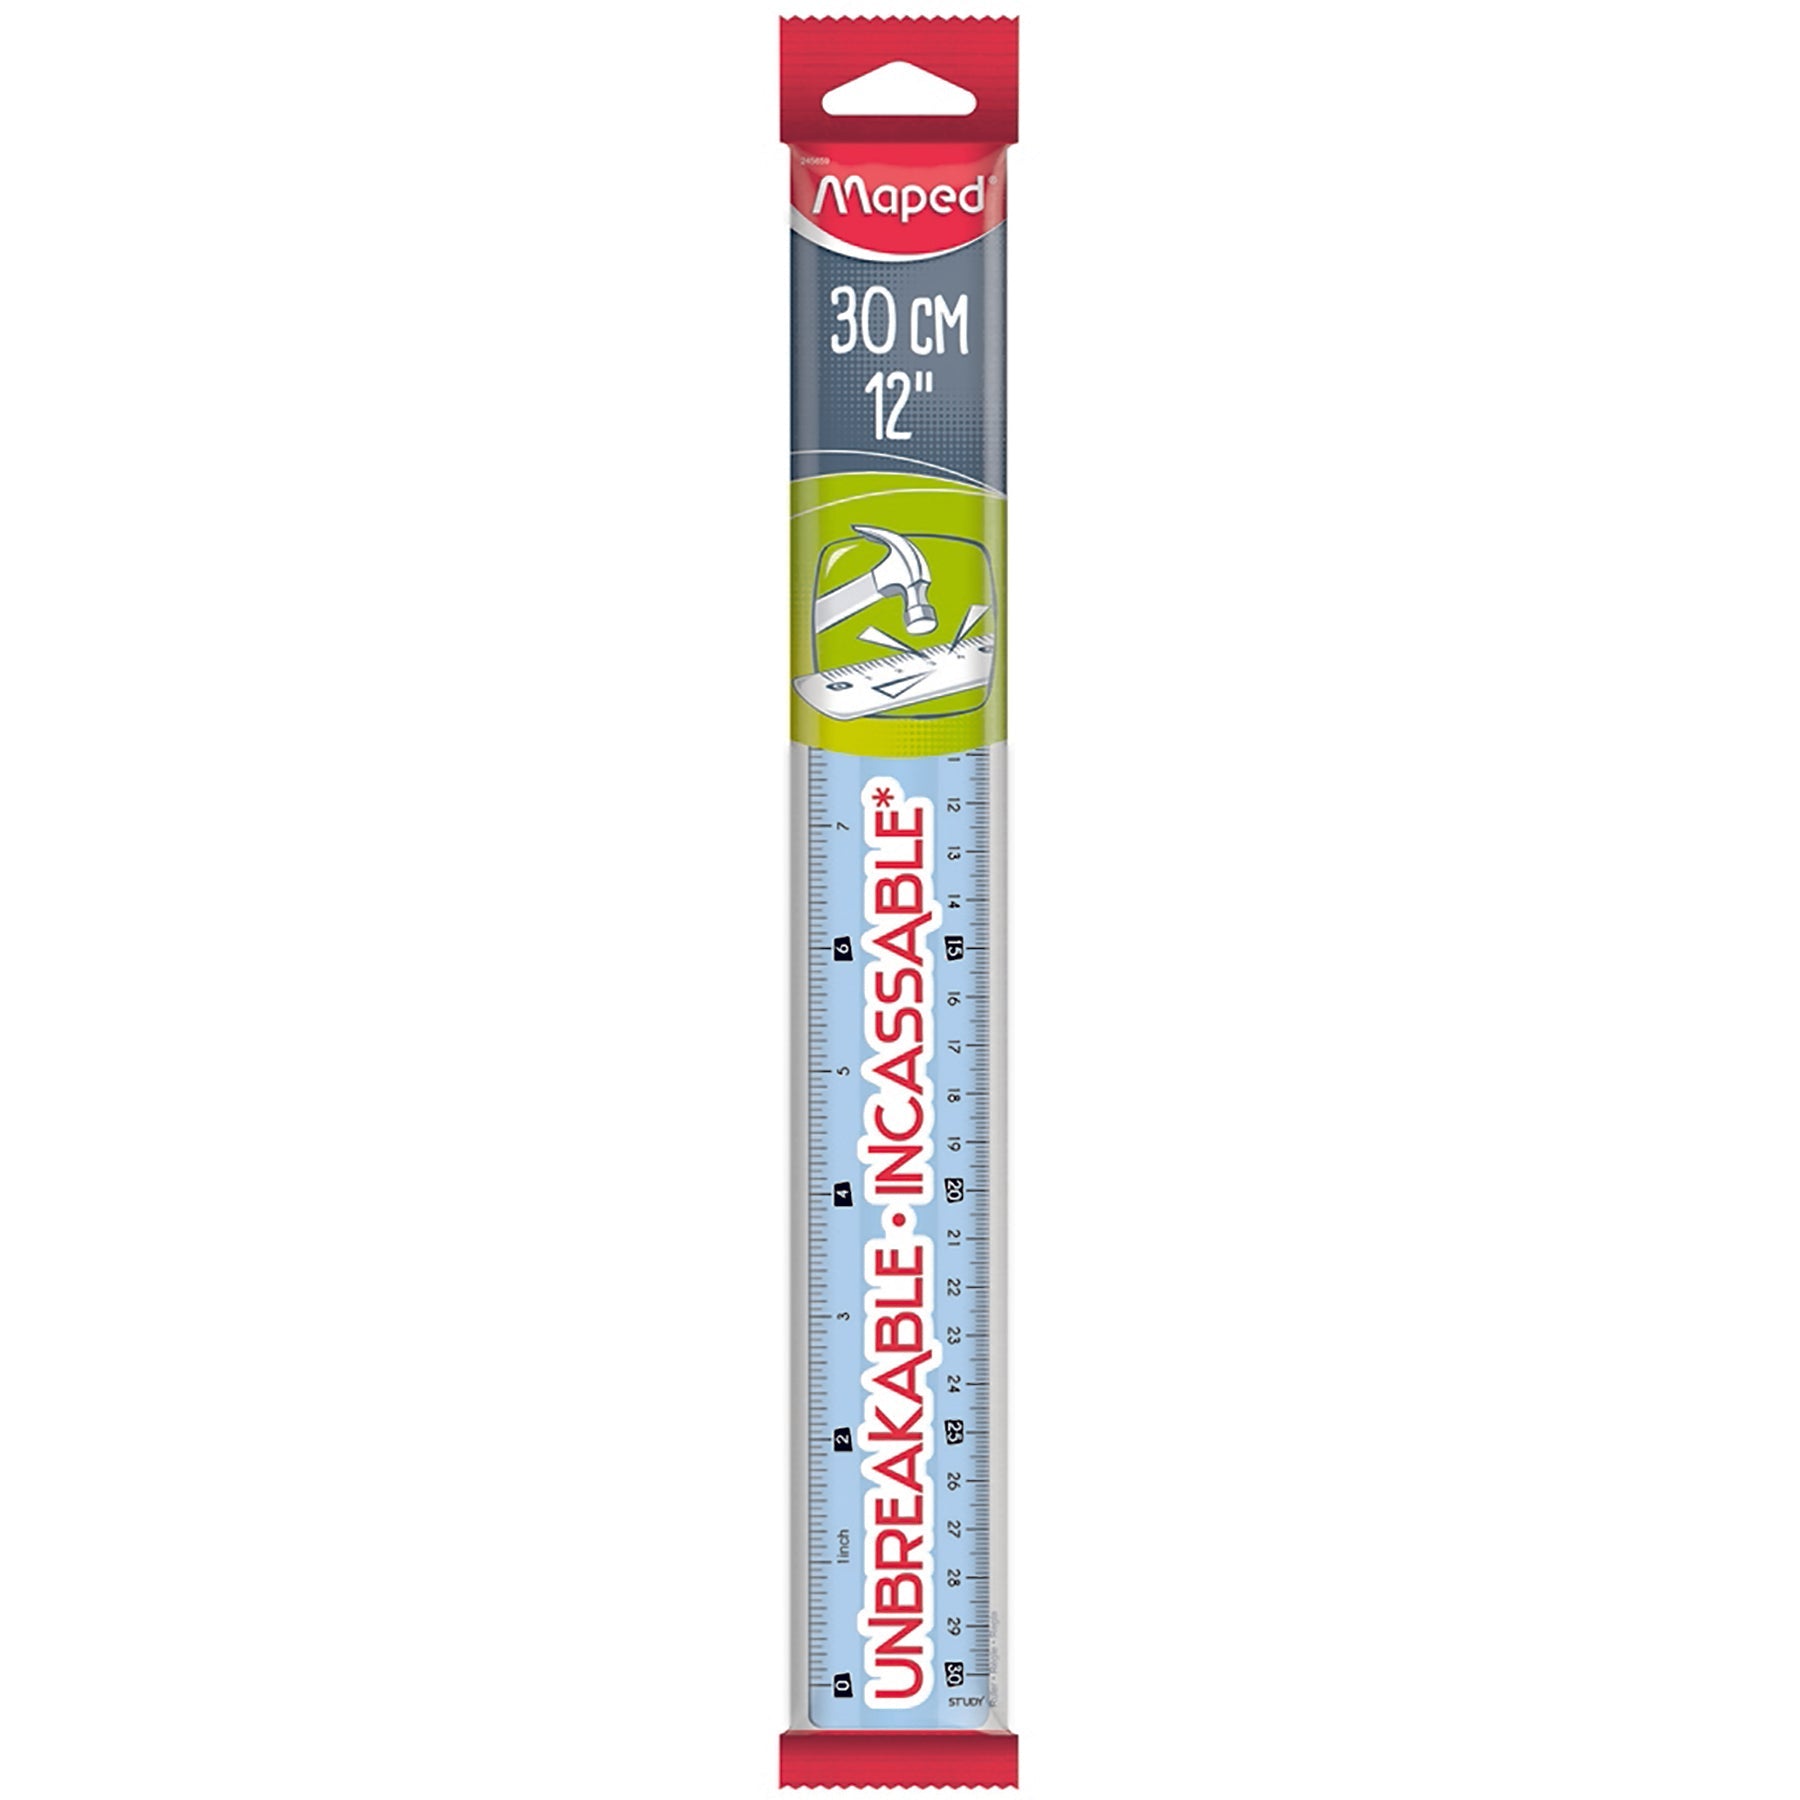 Maped Ruler Unbreakable 12in